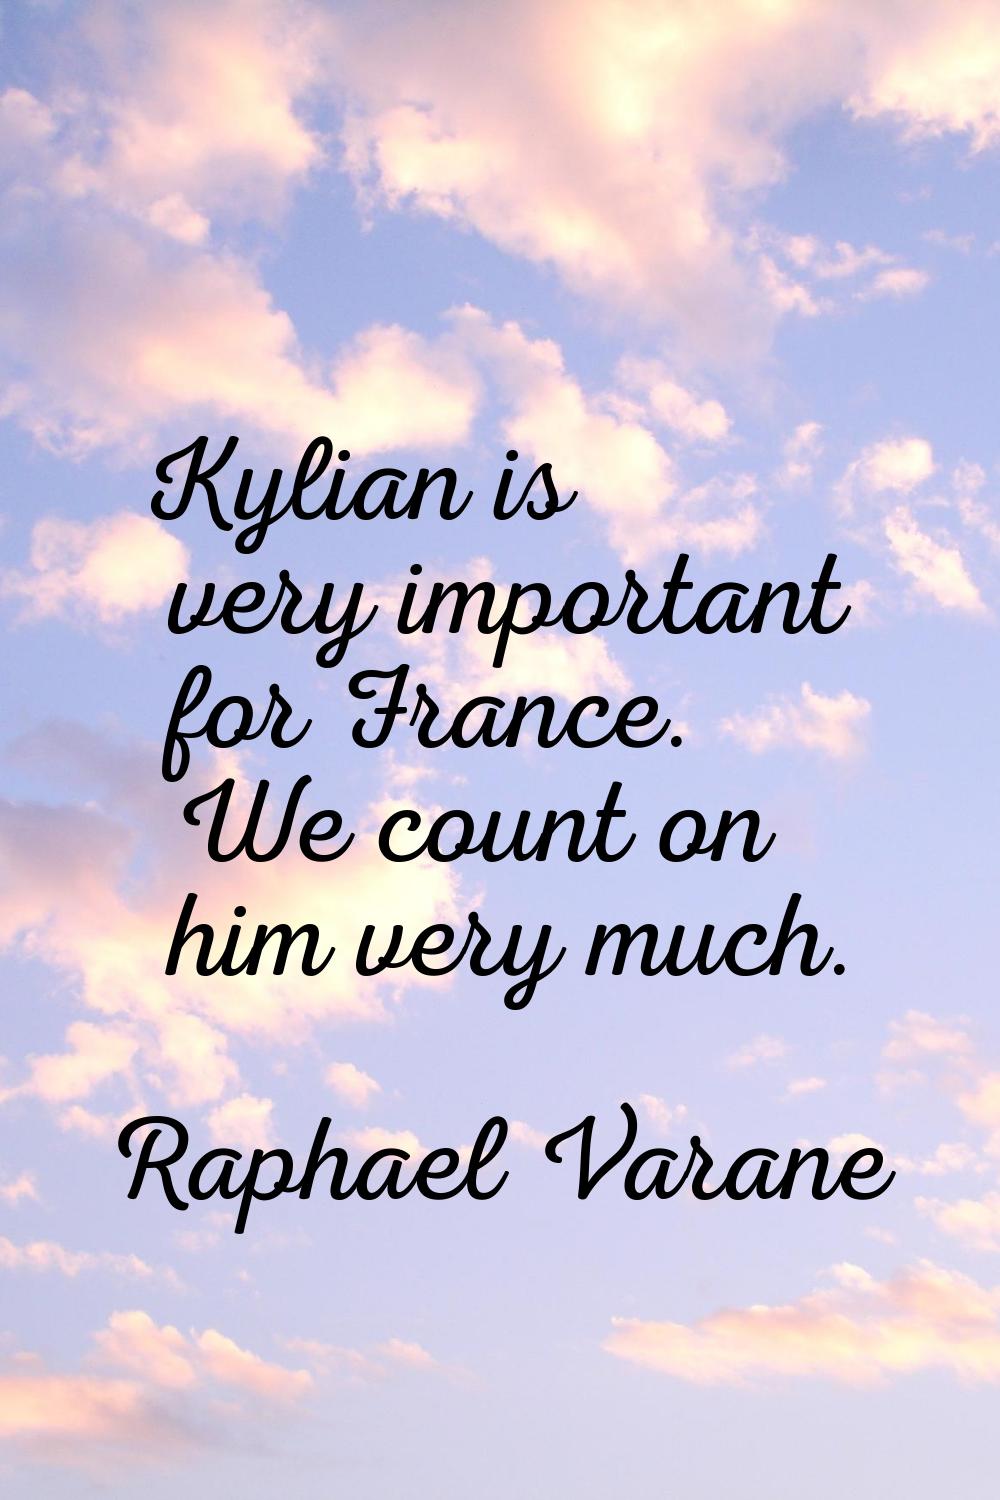 Kylian is very important for France. We count on him very much.